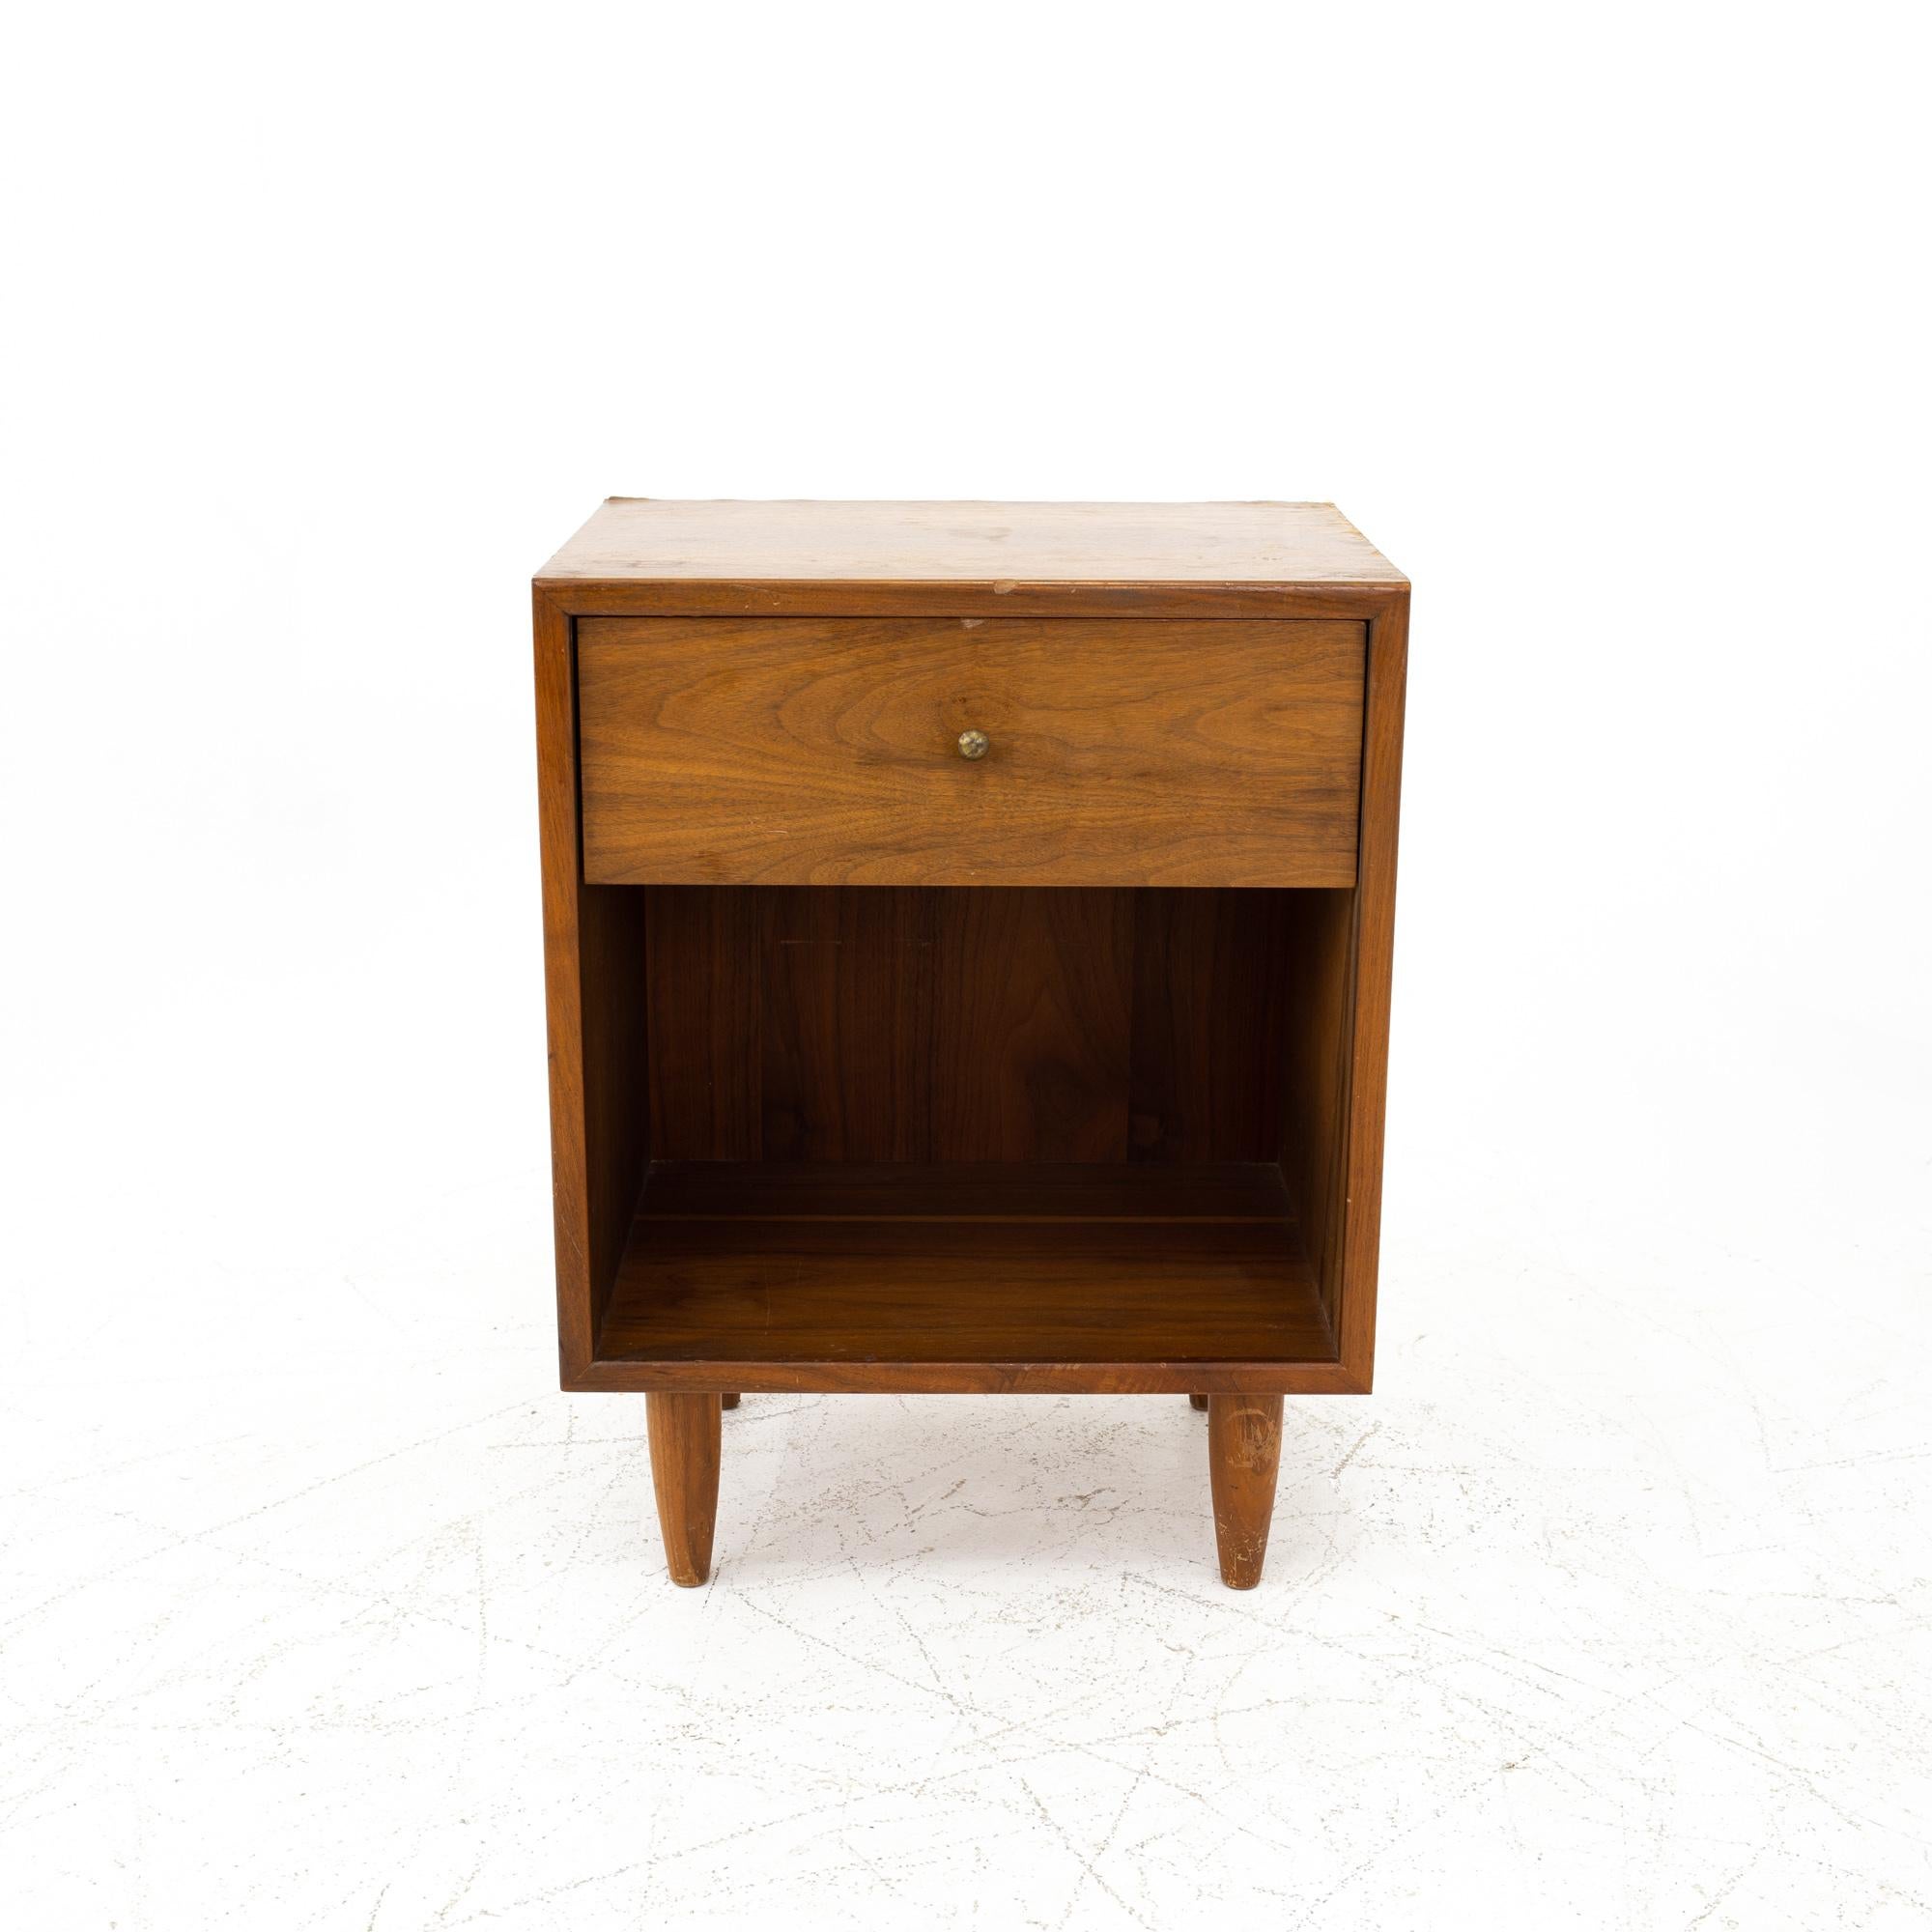 Glenn of California style mid century single drawer walnut nightstand
Nightstand measures: 18.75 wide x 14 deep x 24.5 high

This price includes getting this piece in what we call restored vintage condition. That means the piece is permanently